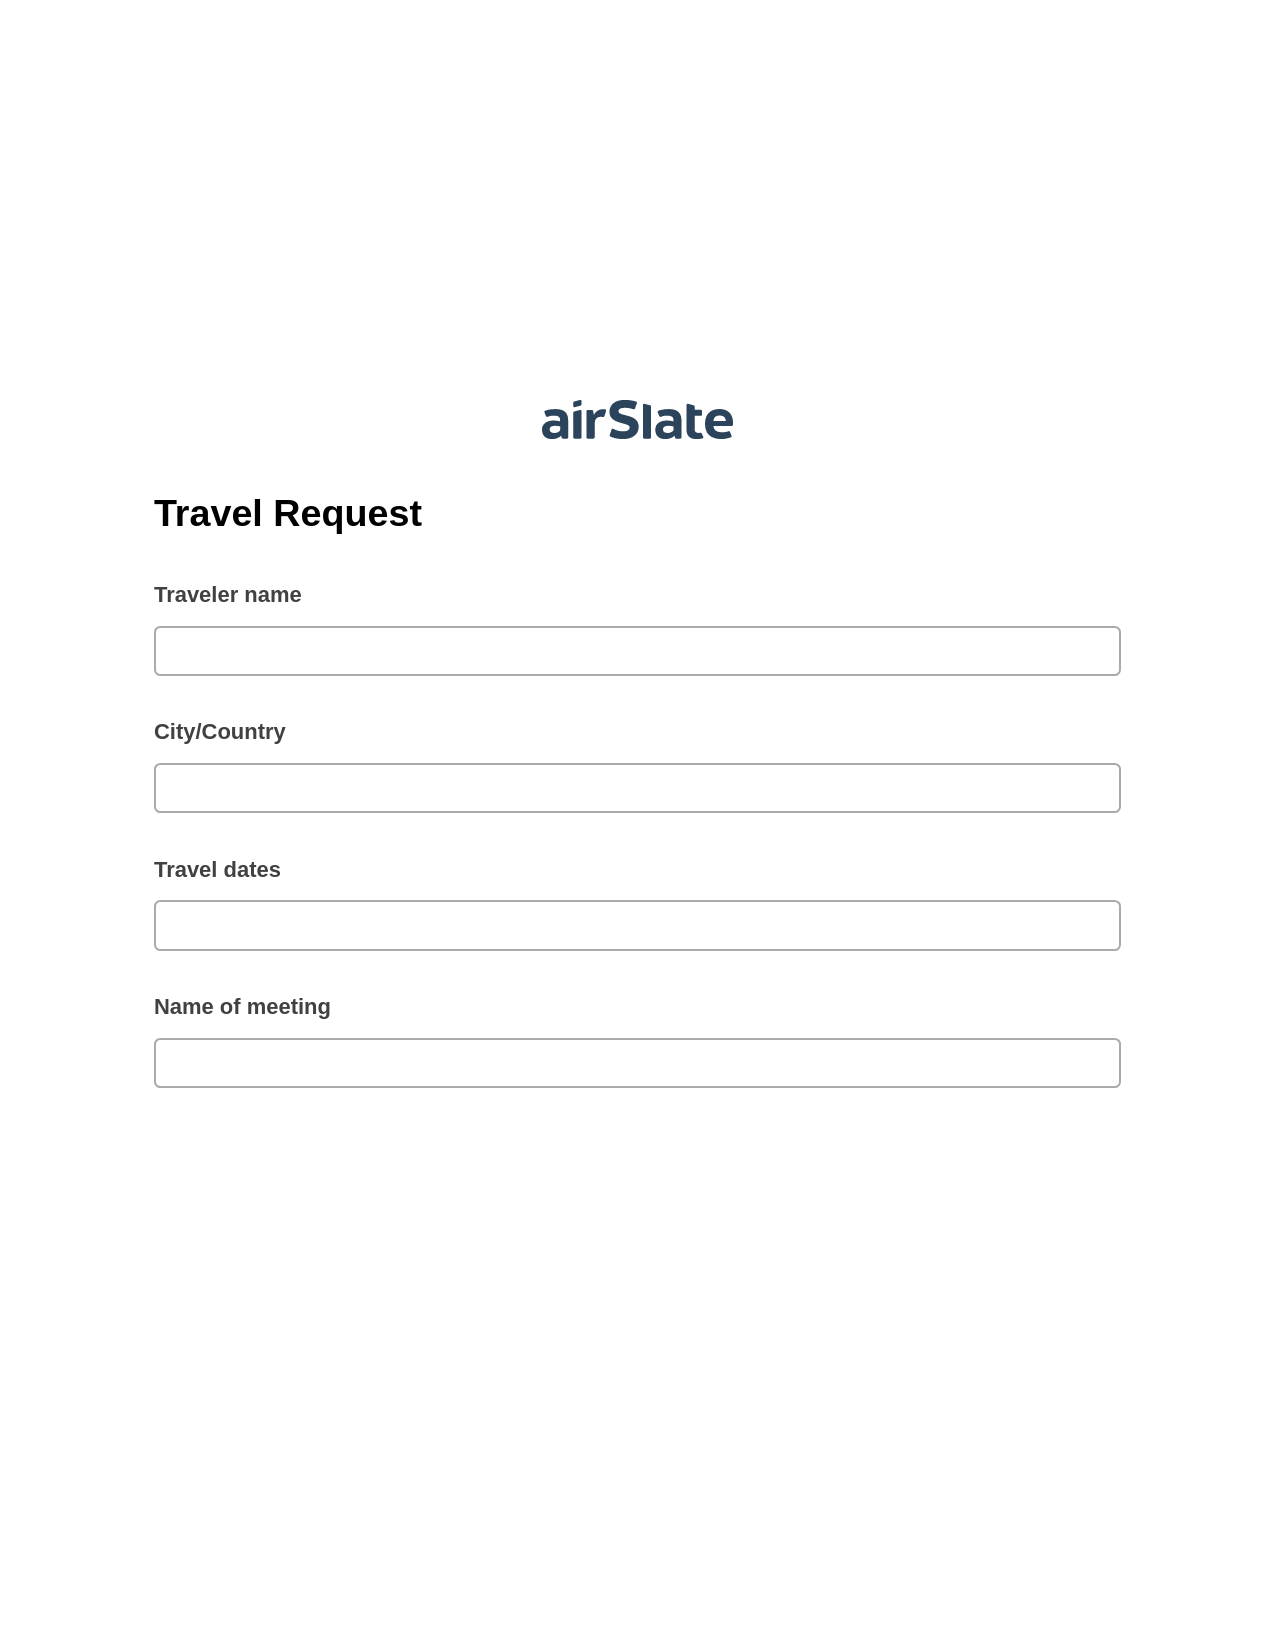 Travel Request Pre-fill Dropdown from Airtable, Pre-fill with Custom Data Bot, Export to NetSuite Record Bot